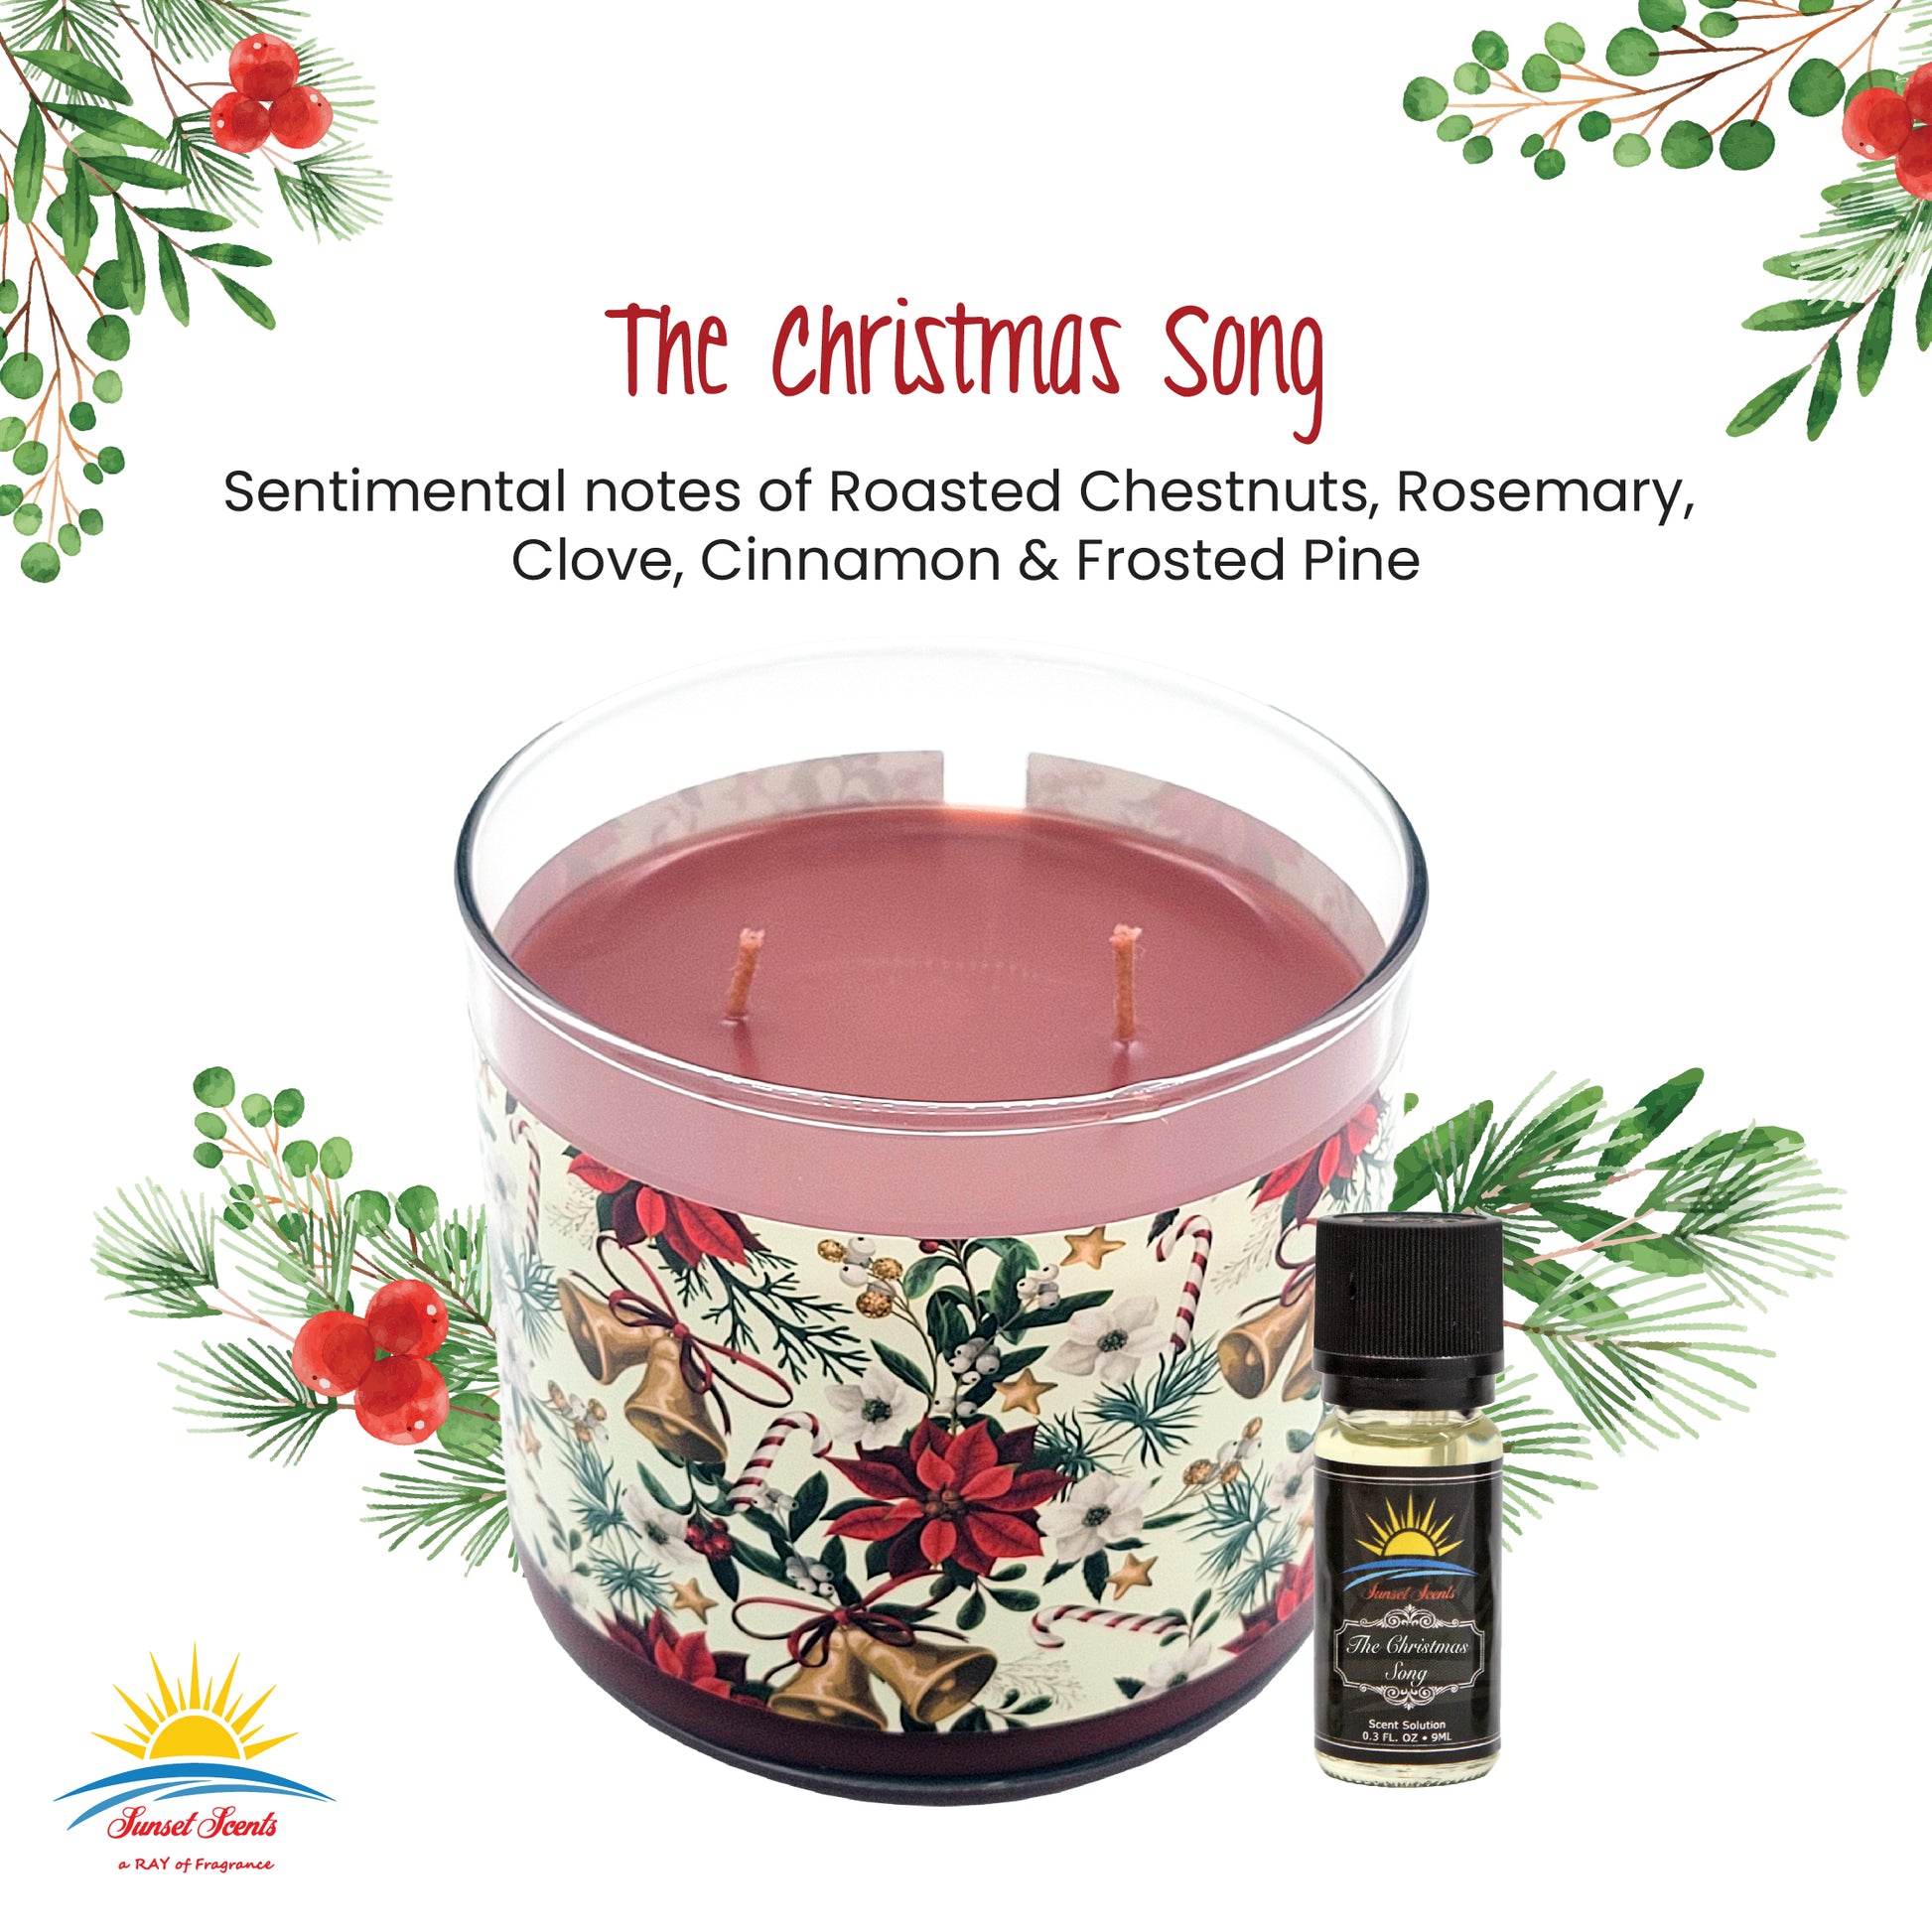 The Christmas Song - Musical Memories Scented Candle 14oz